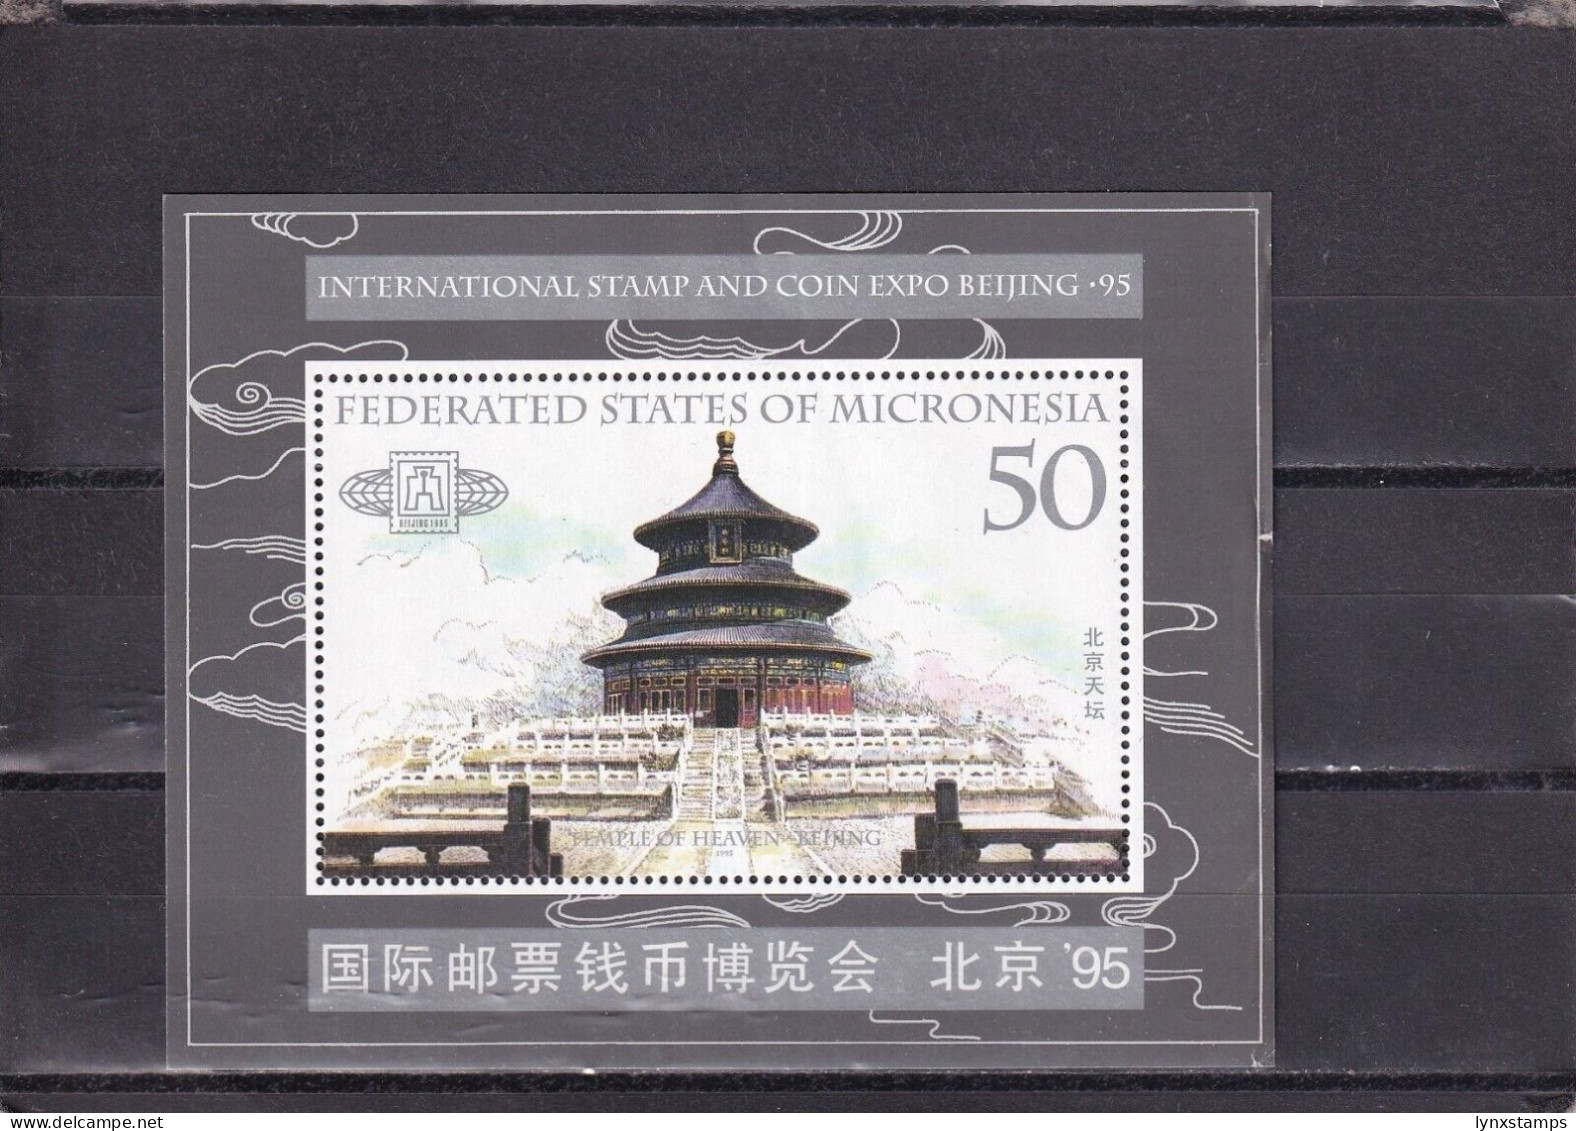 SA04 Micronesia 1995 Inter Stamp And Coin Exhibition Beijing '95 Minisheet - Micronesië